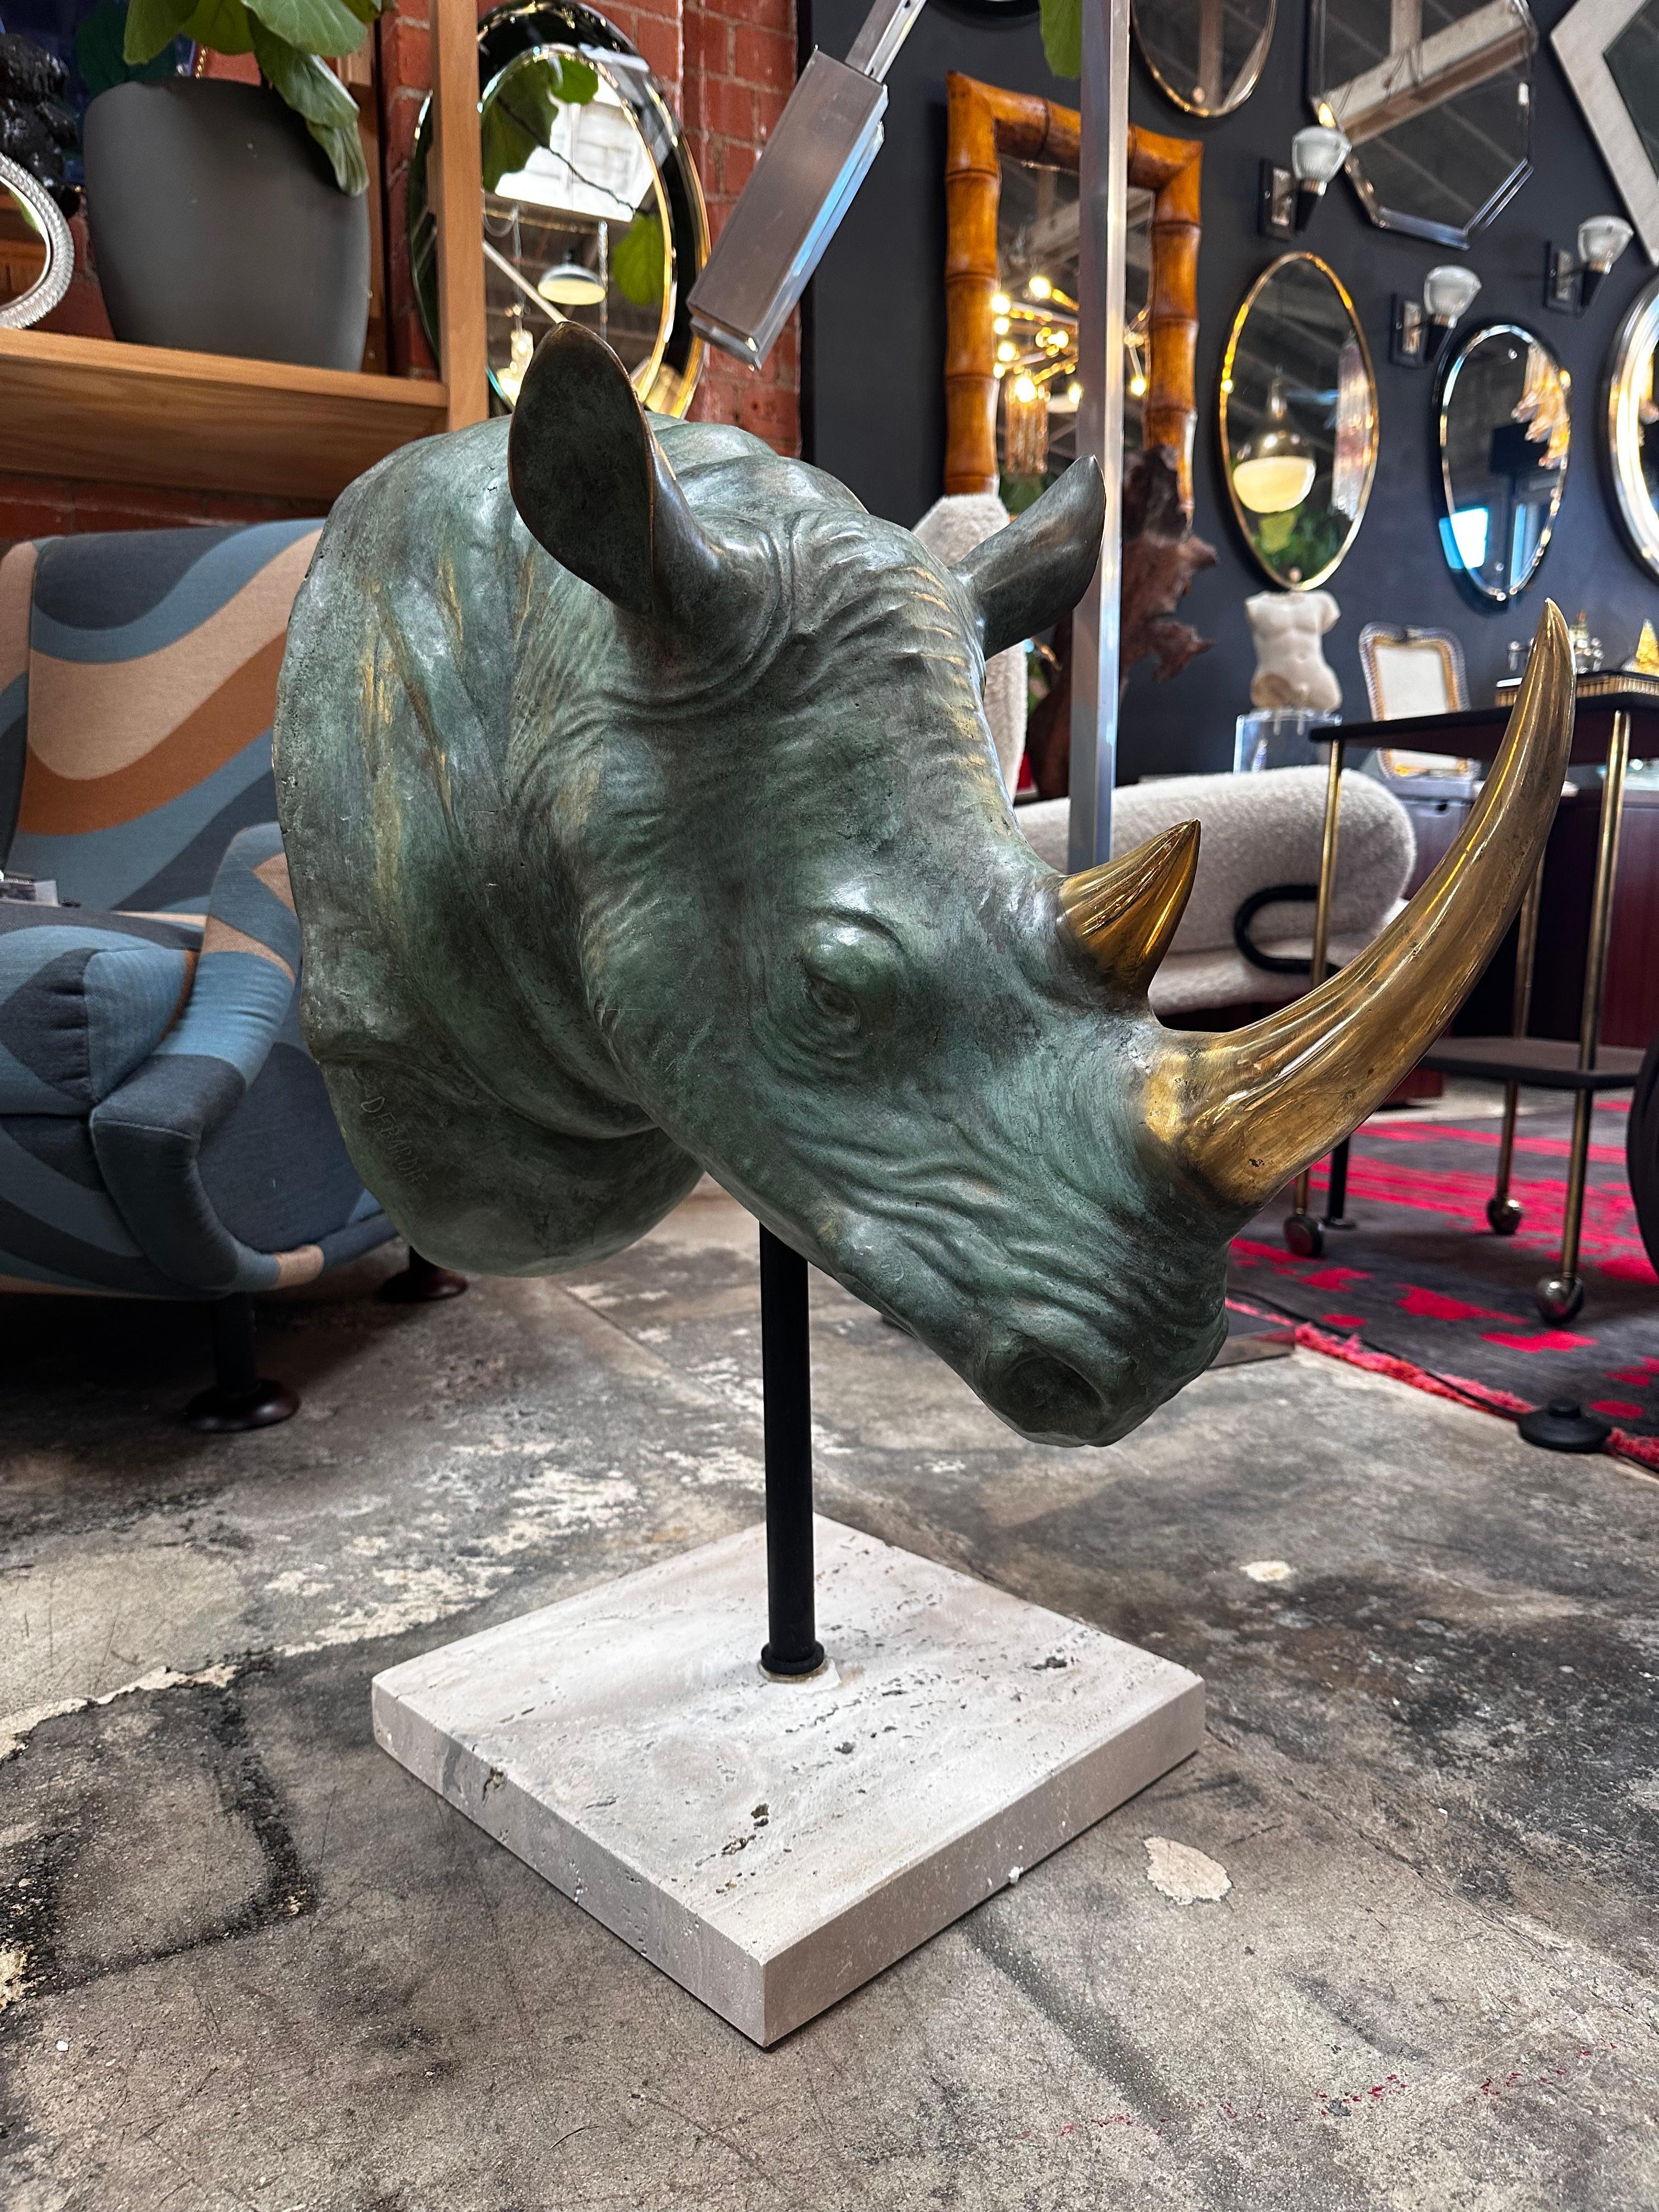 The Vintage Italian Rhino Bronze Sculpture from the 1970s is a striking piece showcasing a rhino head entirely crafted in bronze. It is elegantly presented on a square travertine base, capturing the essence of the 1970s with its unique blend of